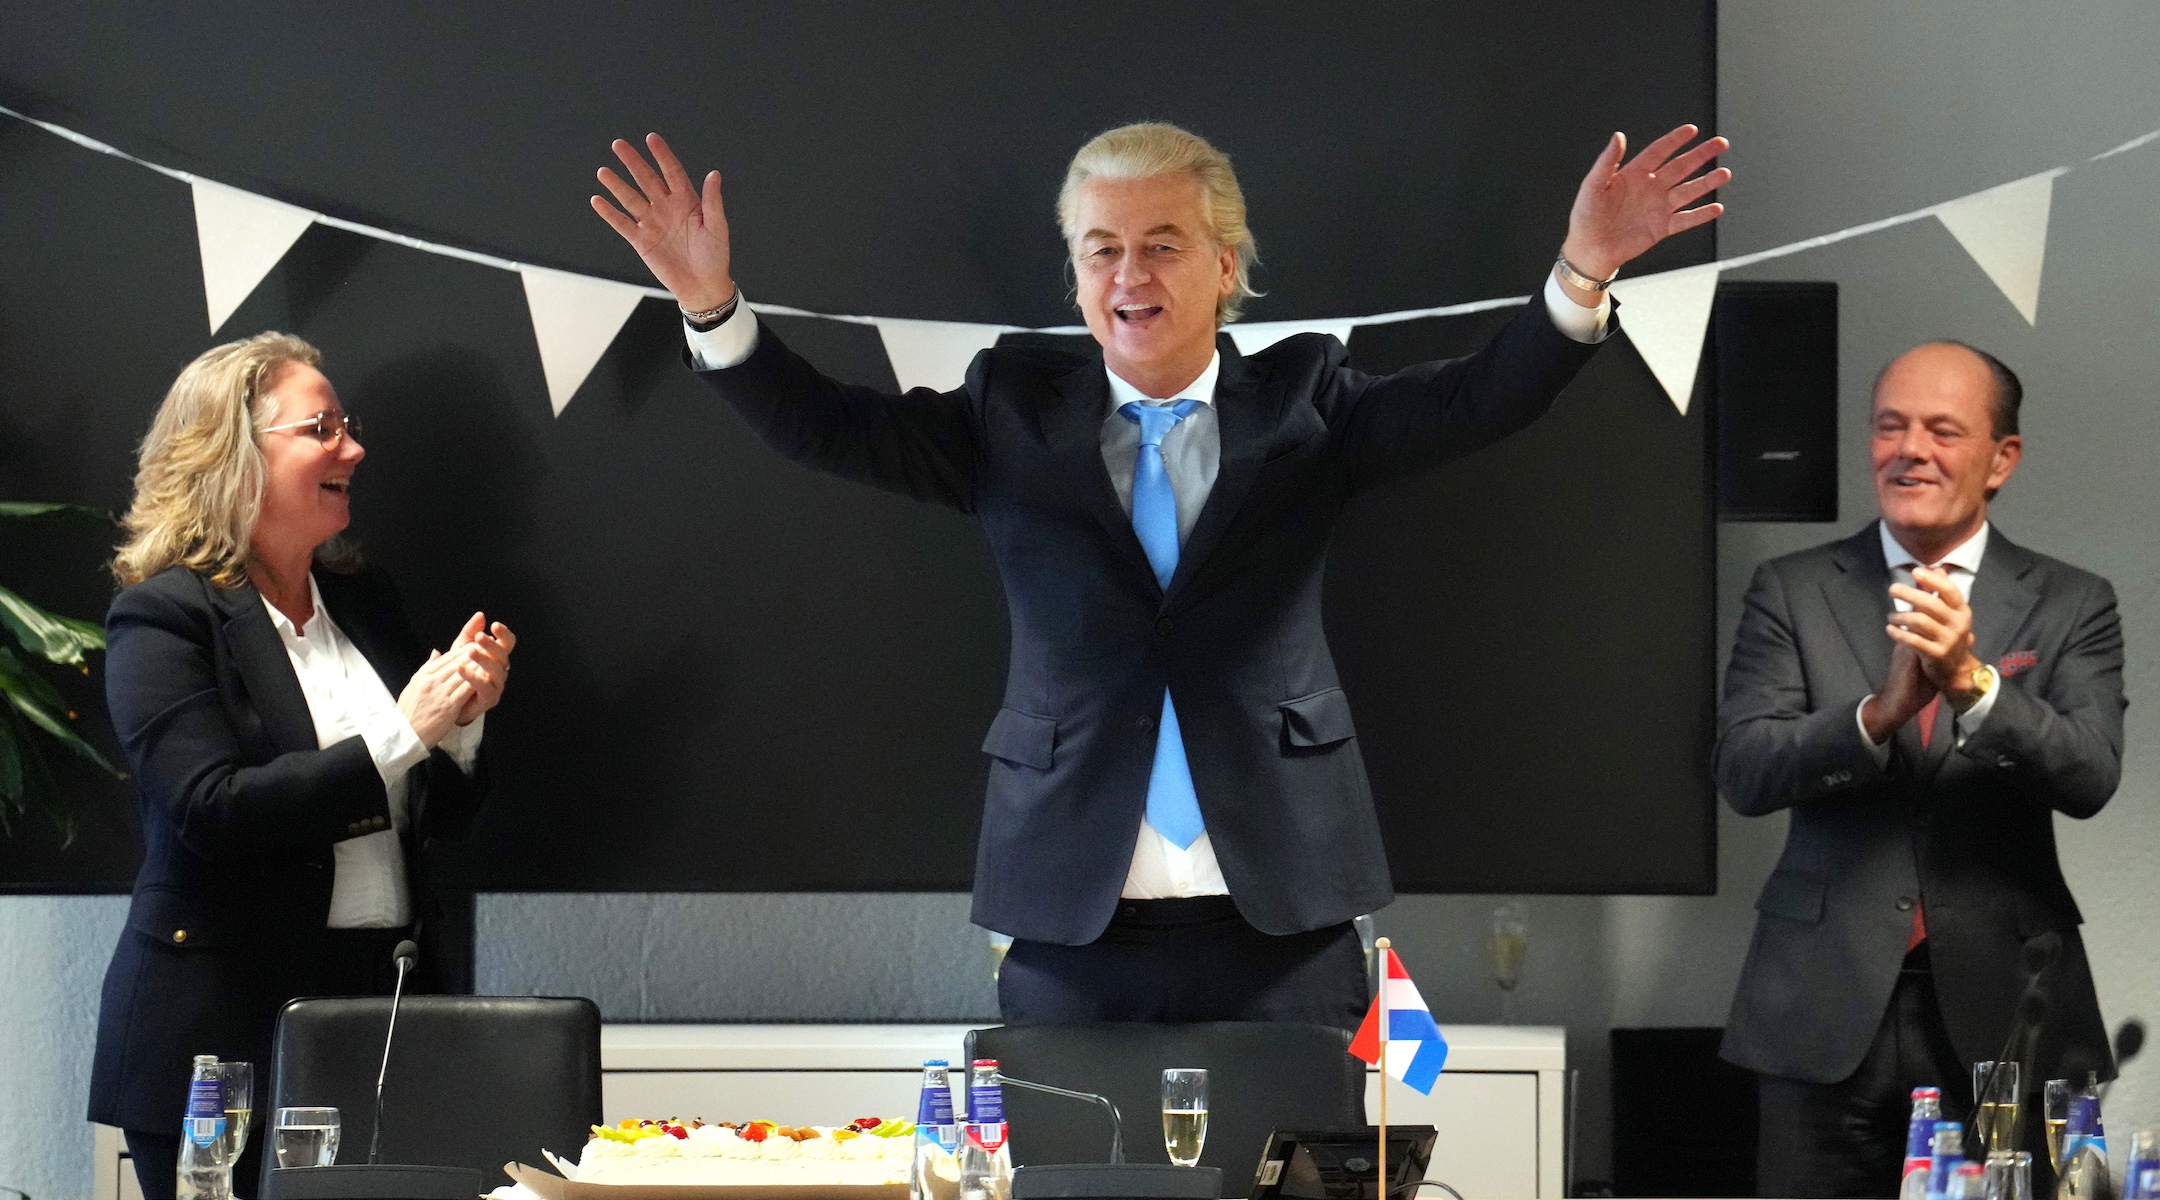 Geert Wilders celebrates in his PVV Party office in the Hague, Netherlands, after his victory in the Dutch general election, Nov. 23, 2023. (Carl Court/Getty Images)